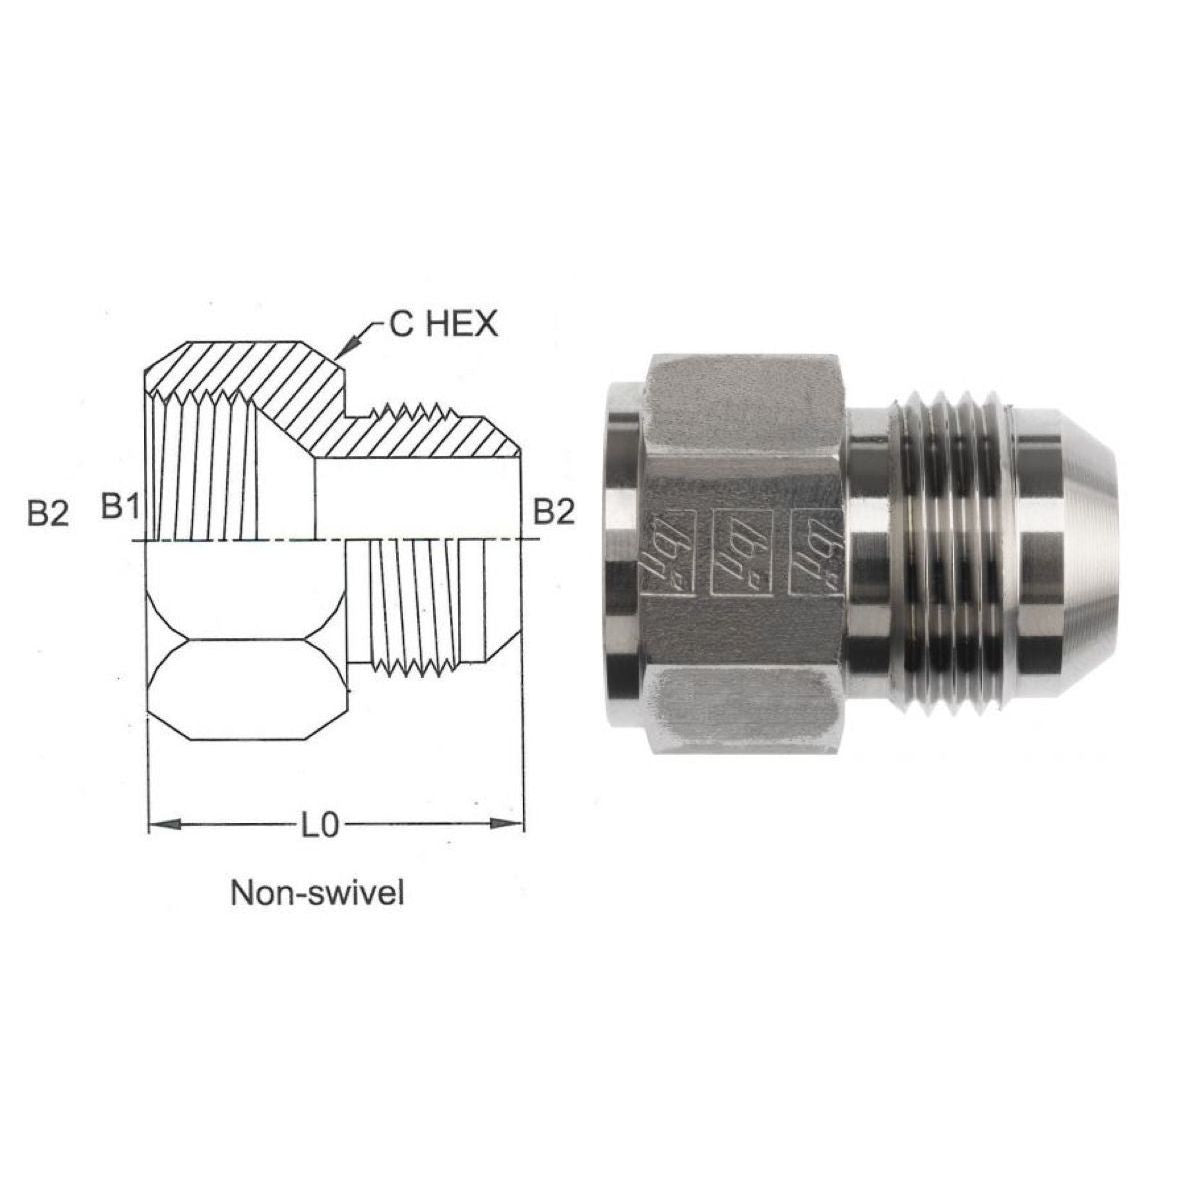 2406-16-20-SS : OneHydraulics Straight Reducer, 1 Female JIC x 1.25 (1-1/4) Male JIC, Stainless Steel, 4800psi